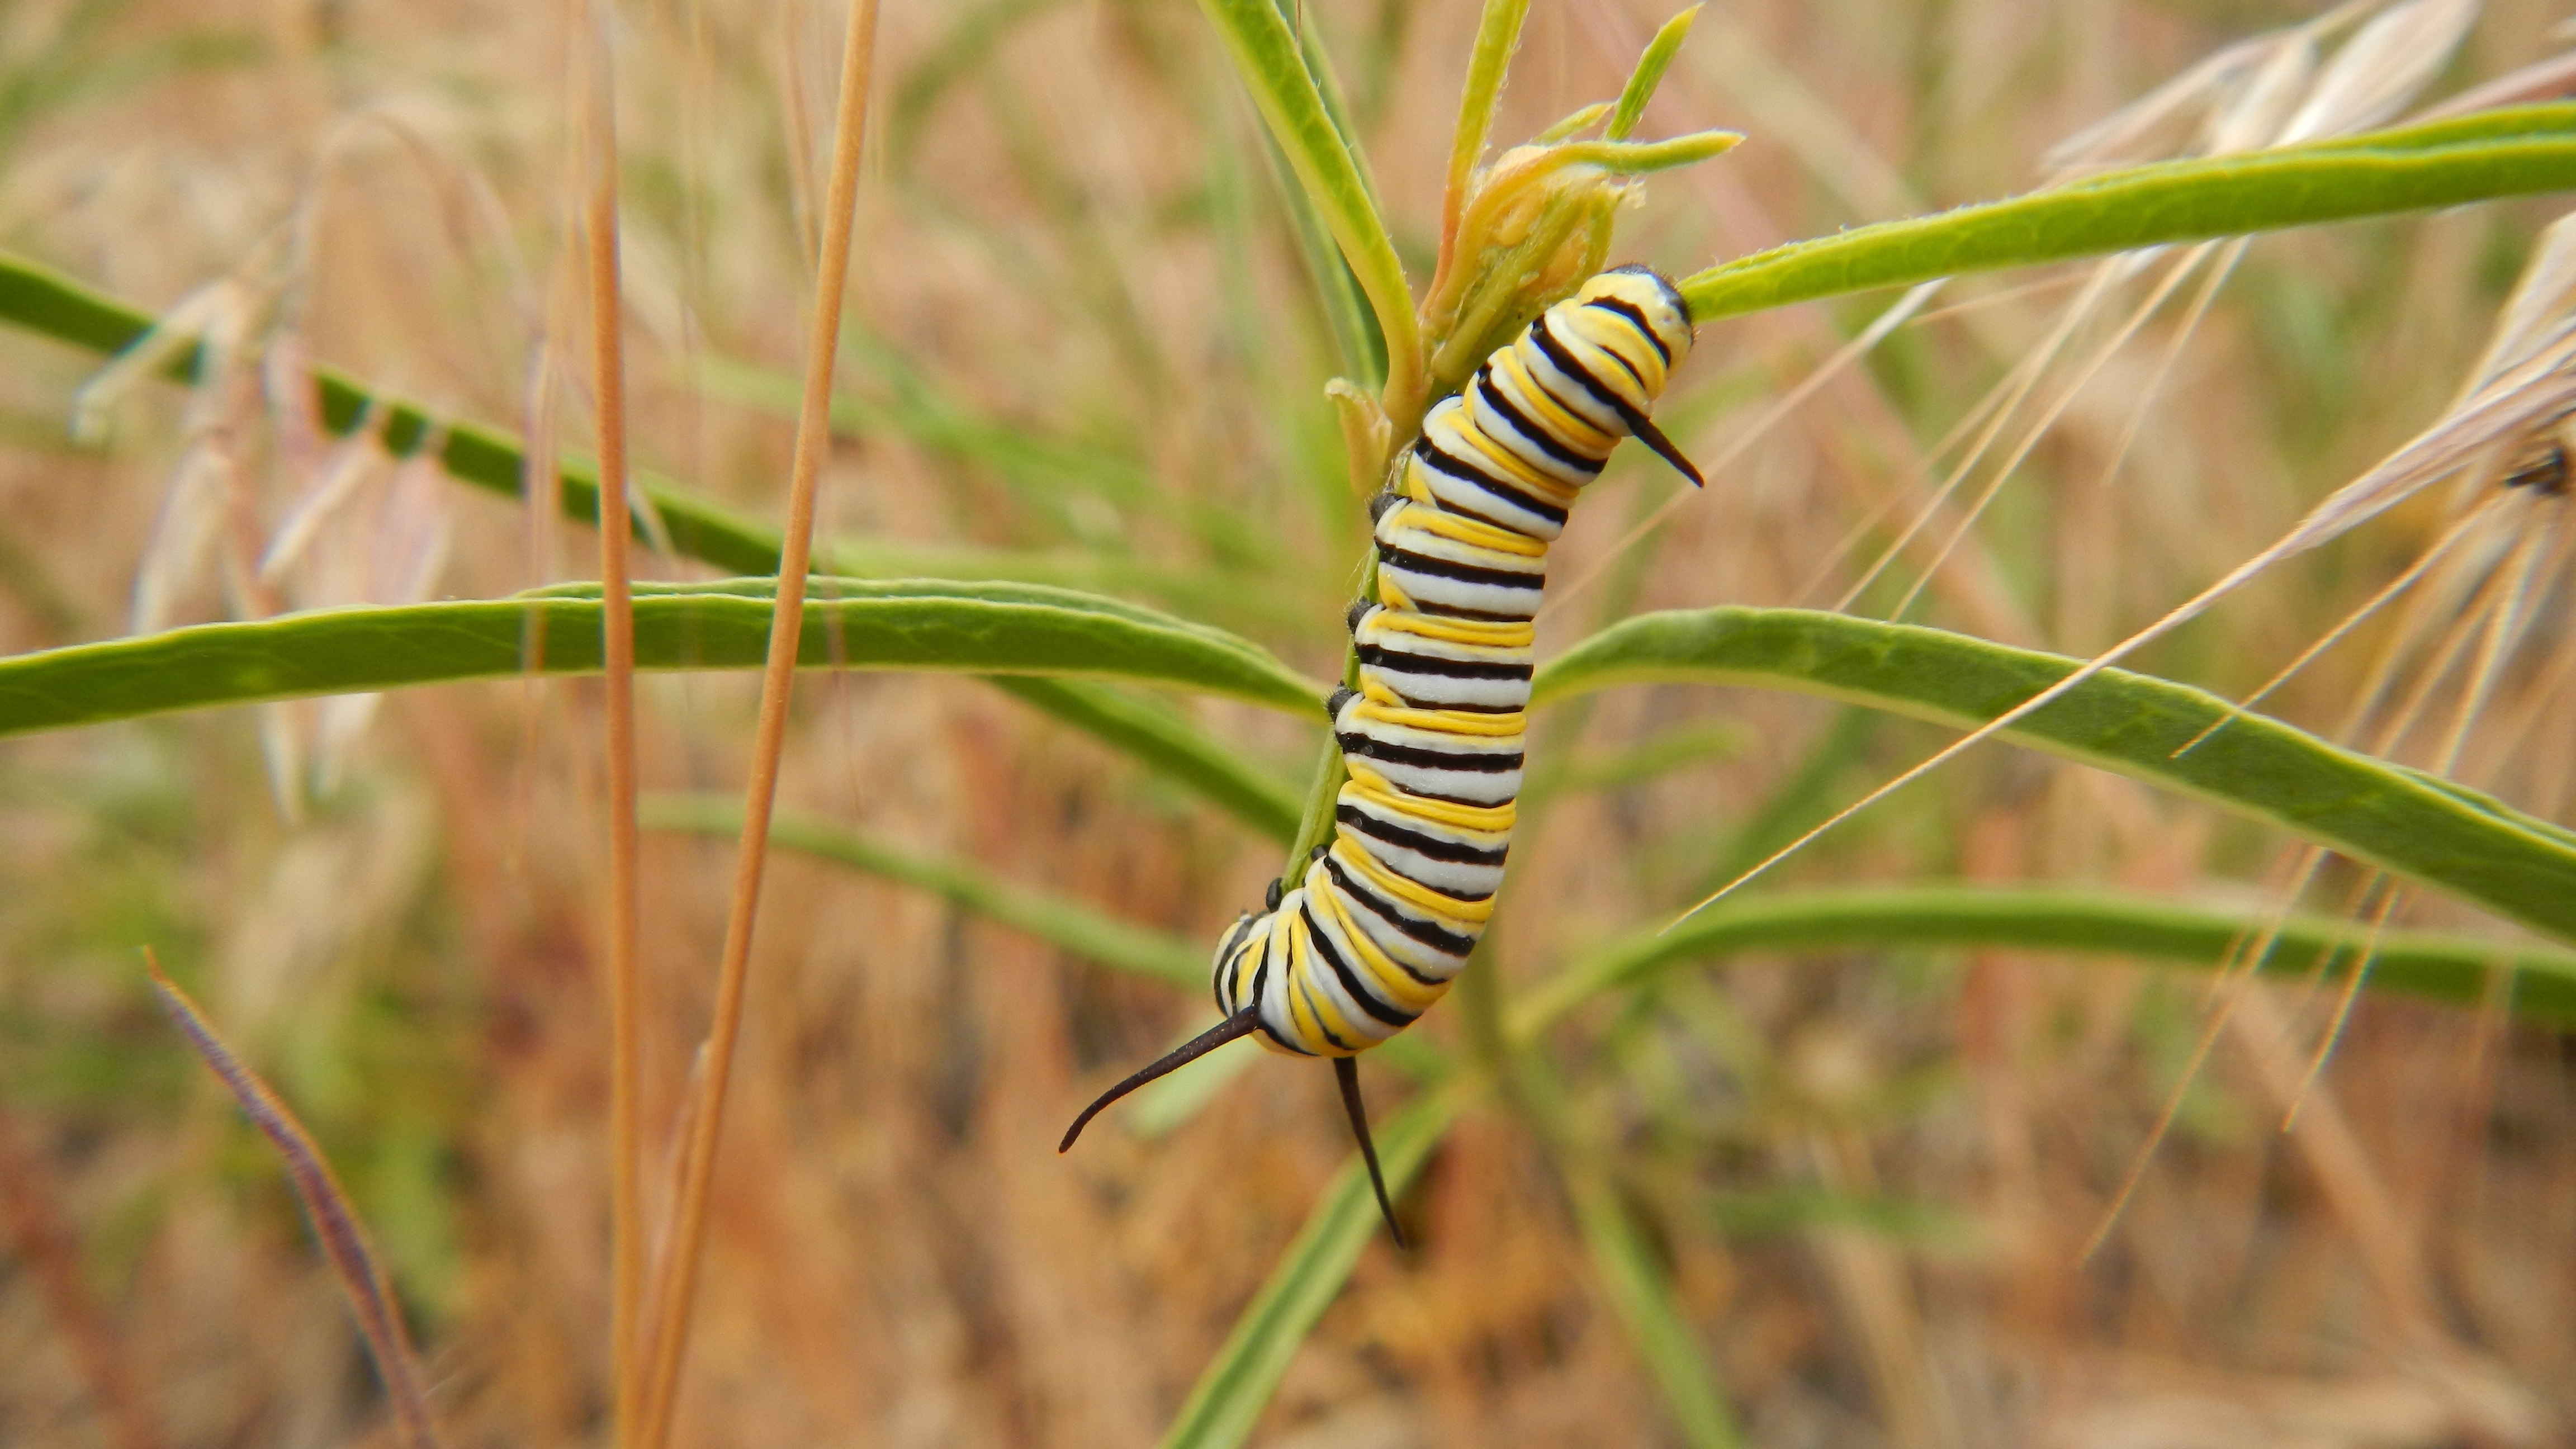 The distinctive yellow, black, and white striped caterpillar of the monarch feeding on narrowleaf milkweed.